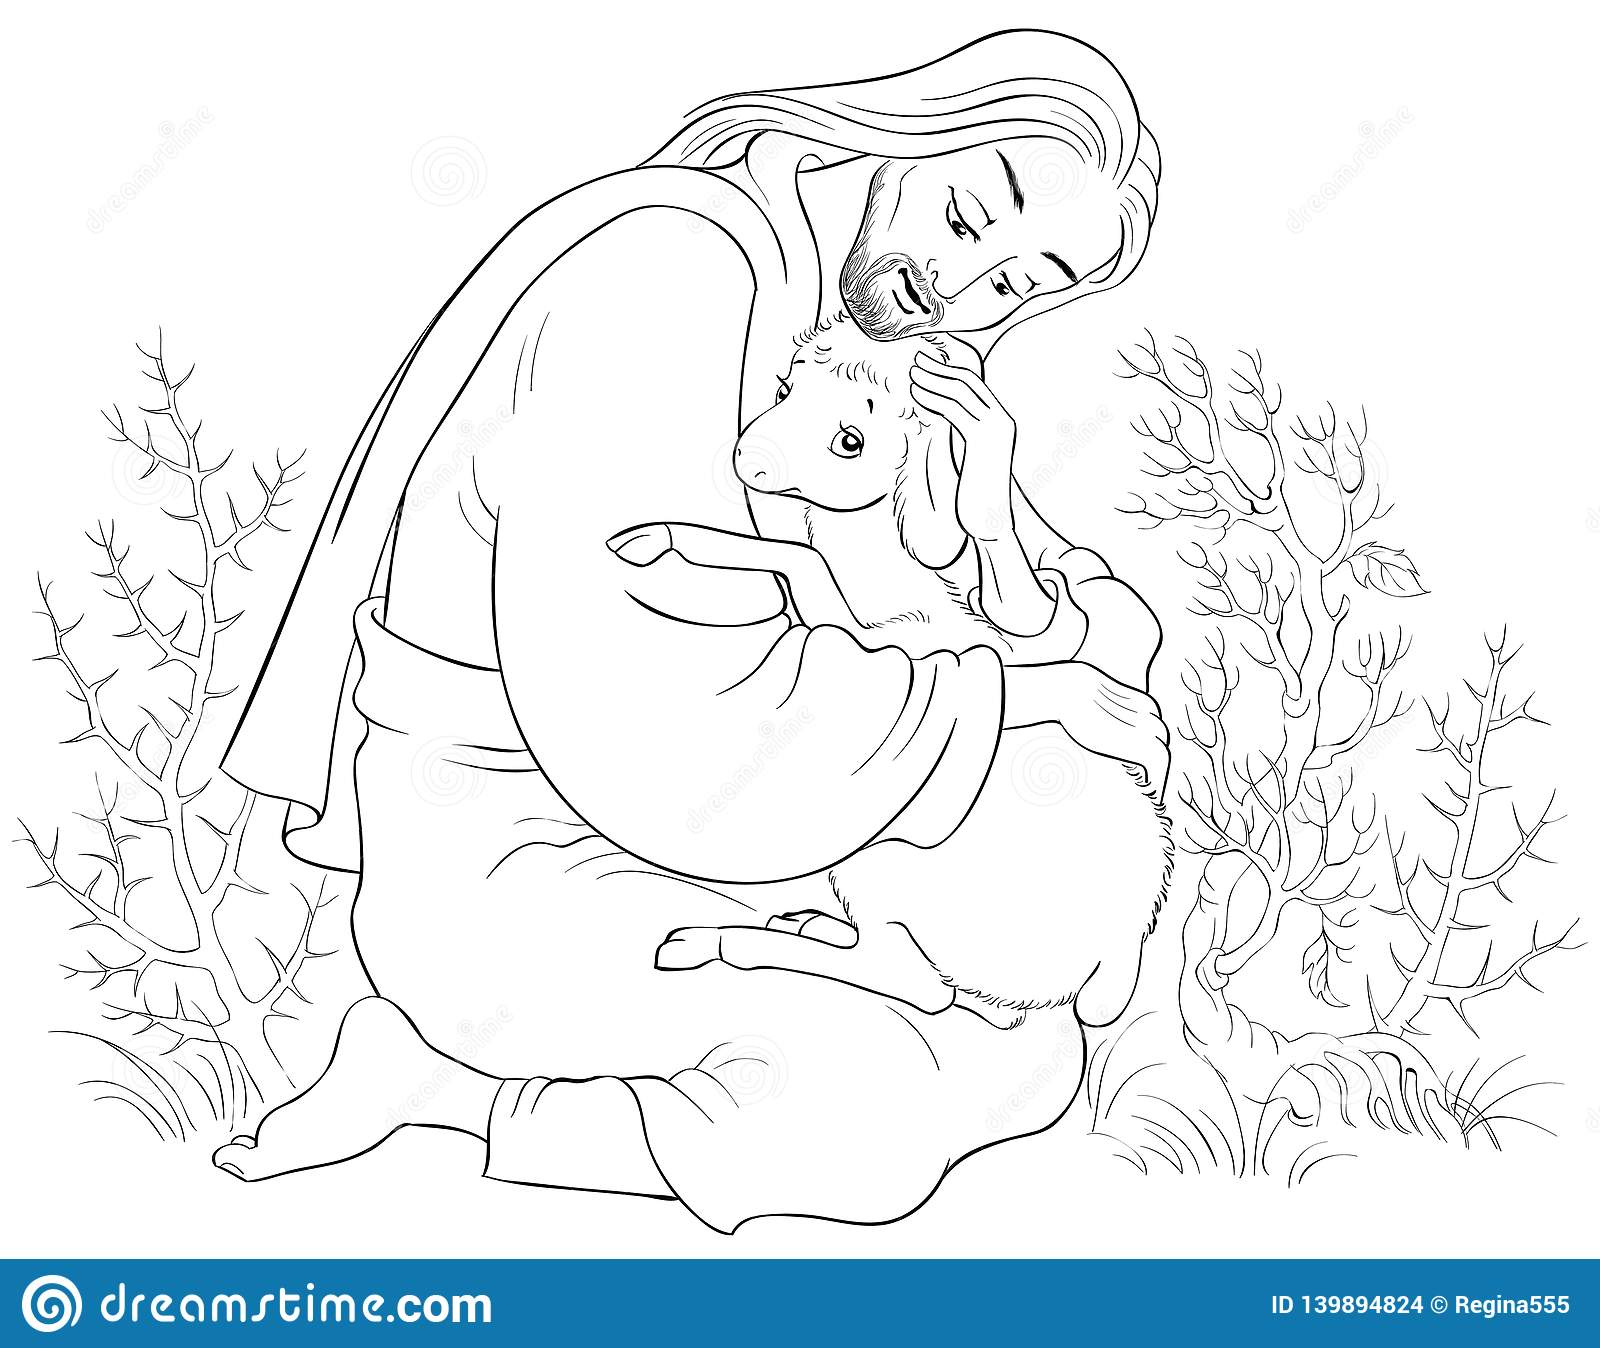 Coloring Pages Sheep And The Shepherd Coloring Ideas History Of Jesus Christ The Parable Lost Sheep Good